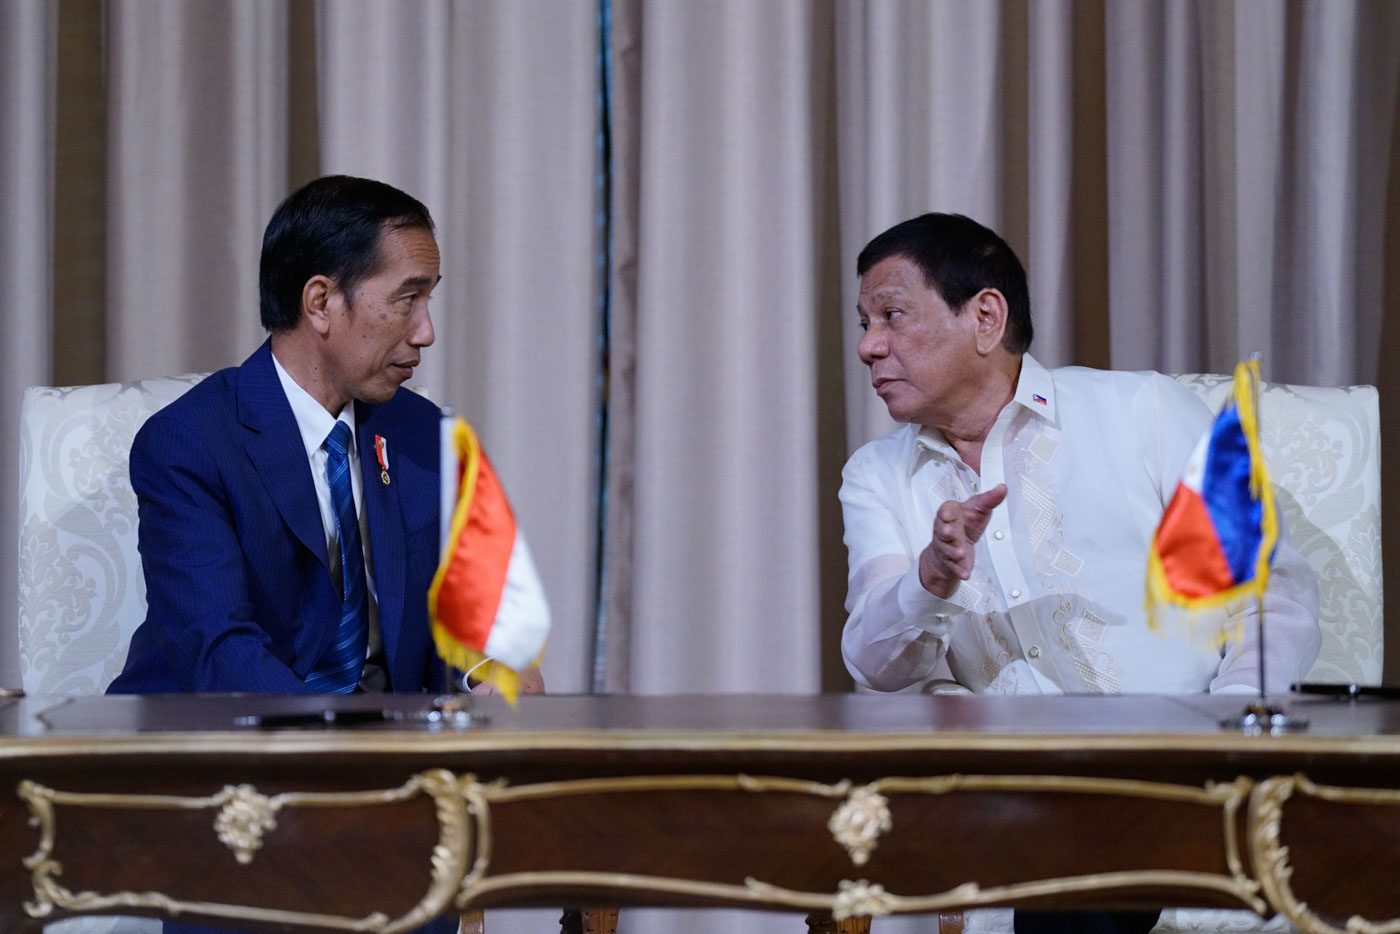 Duterte to visit Bali for October 11 meeting with ASEAN leaders